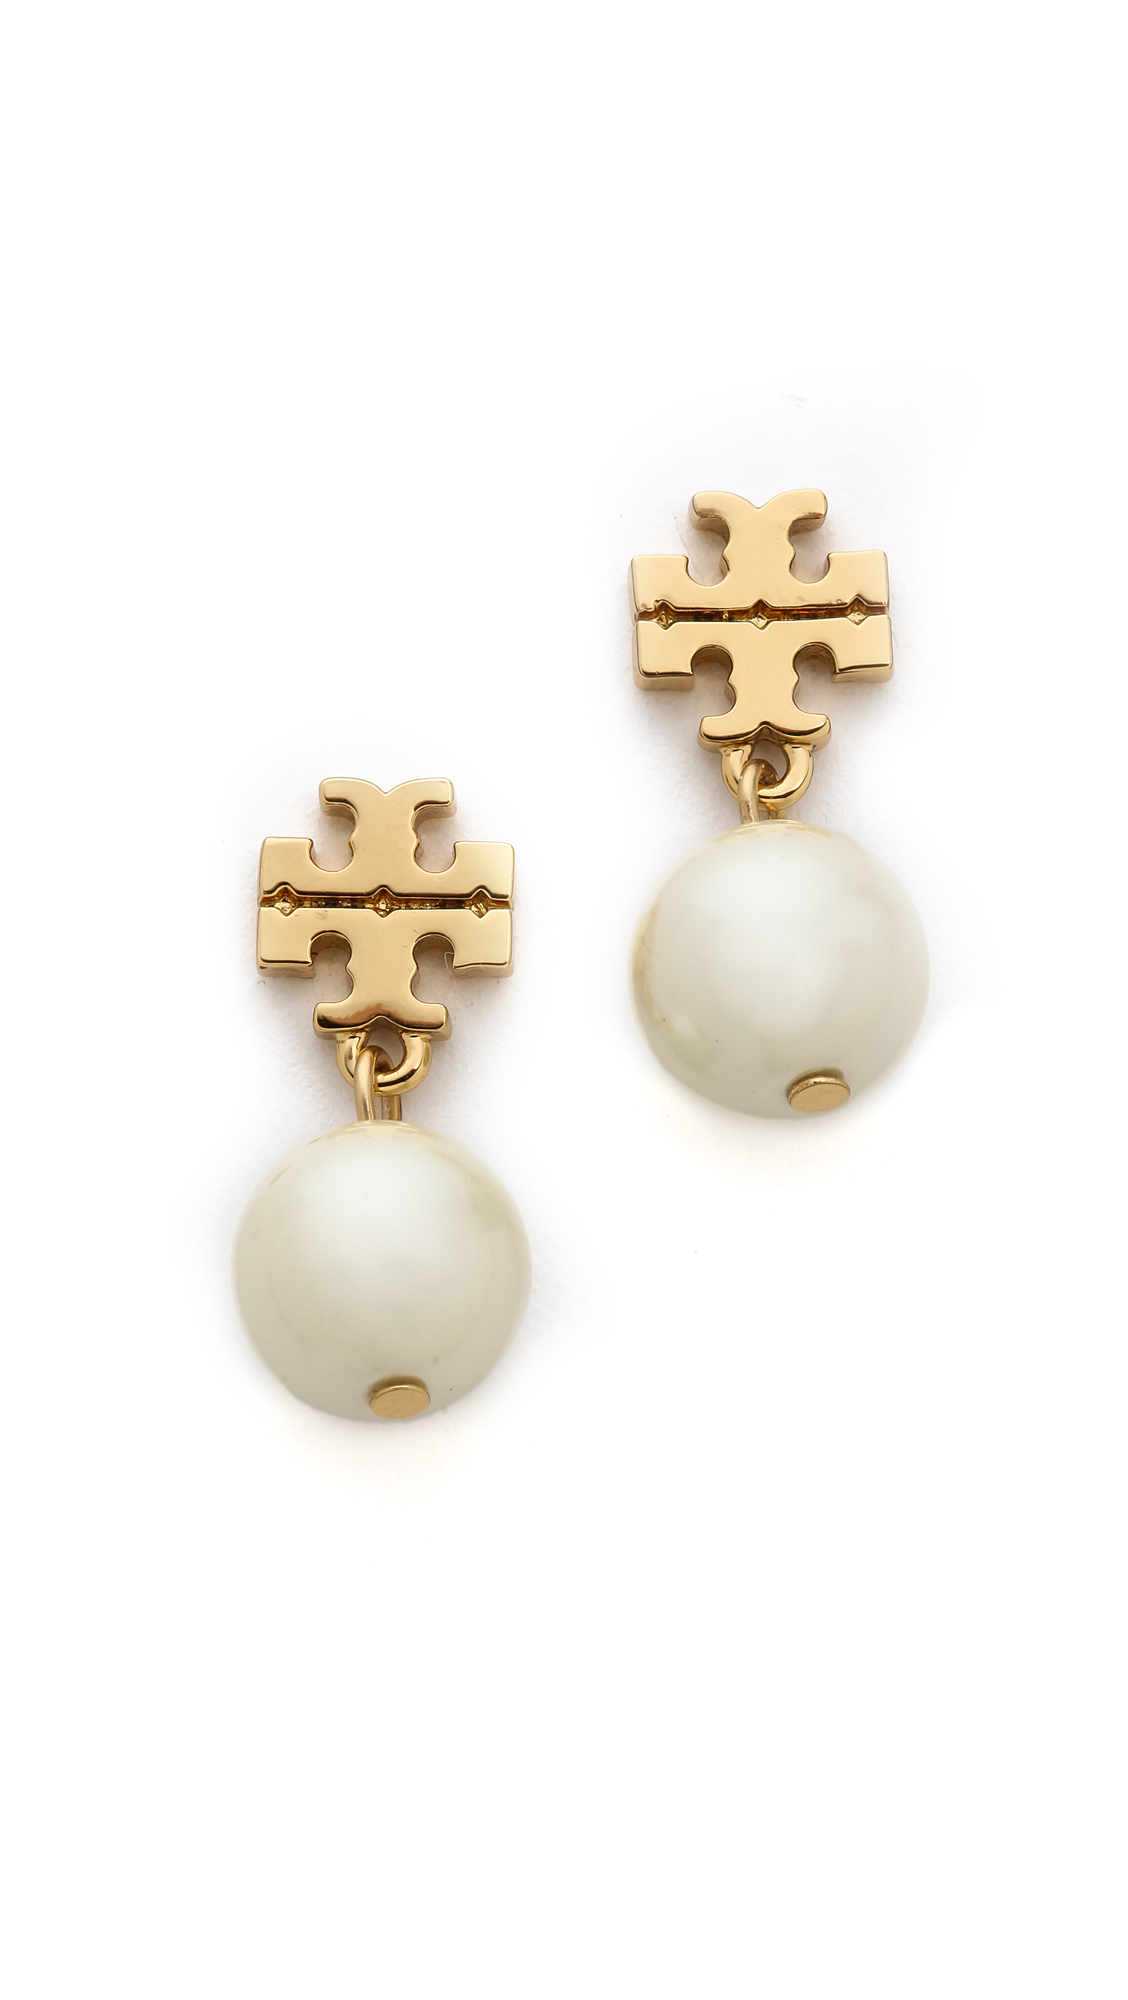 Tory burch Evie Drop Earrings - Ivory/shiny Gold in Gold (Ivory/Shiny